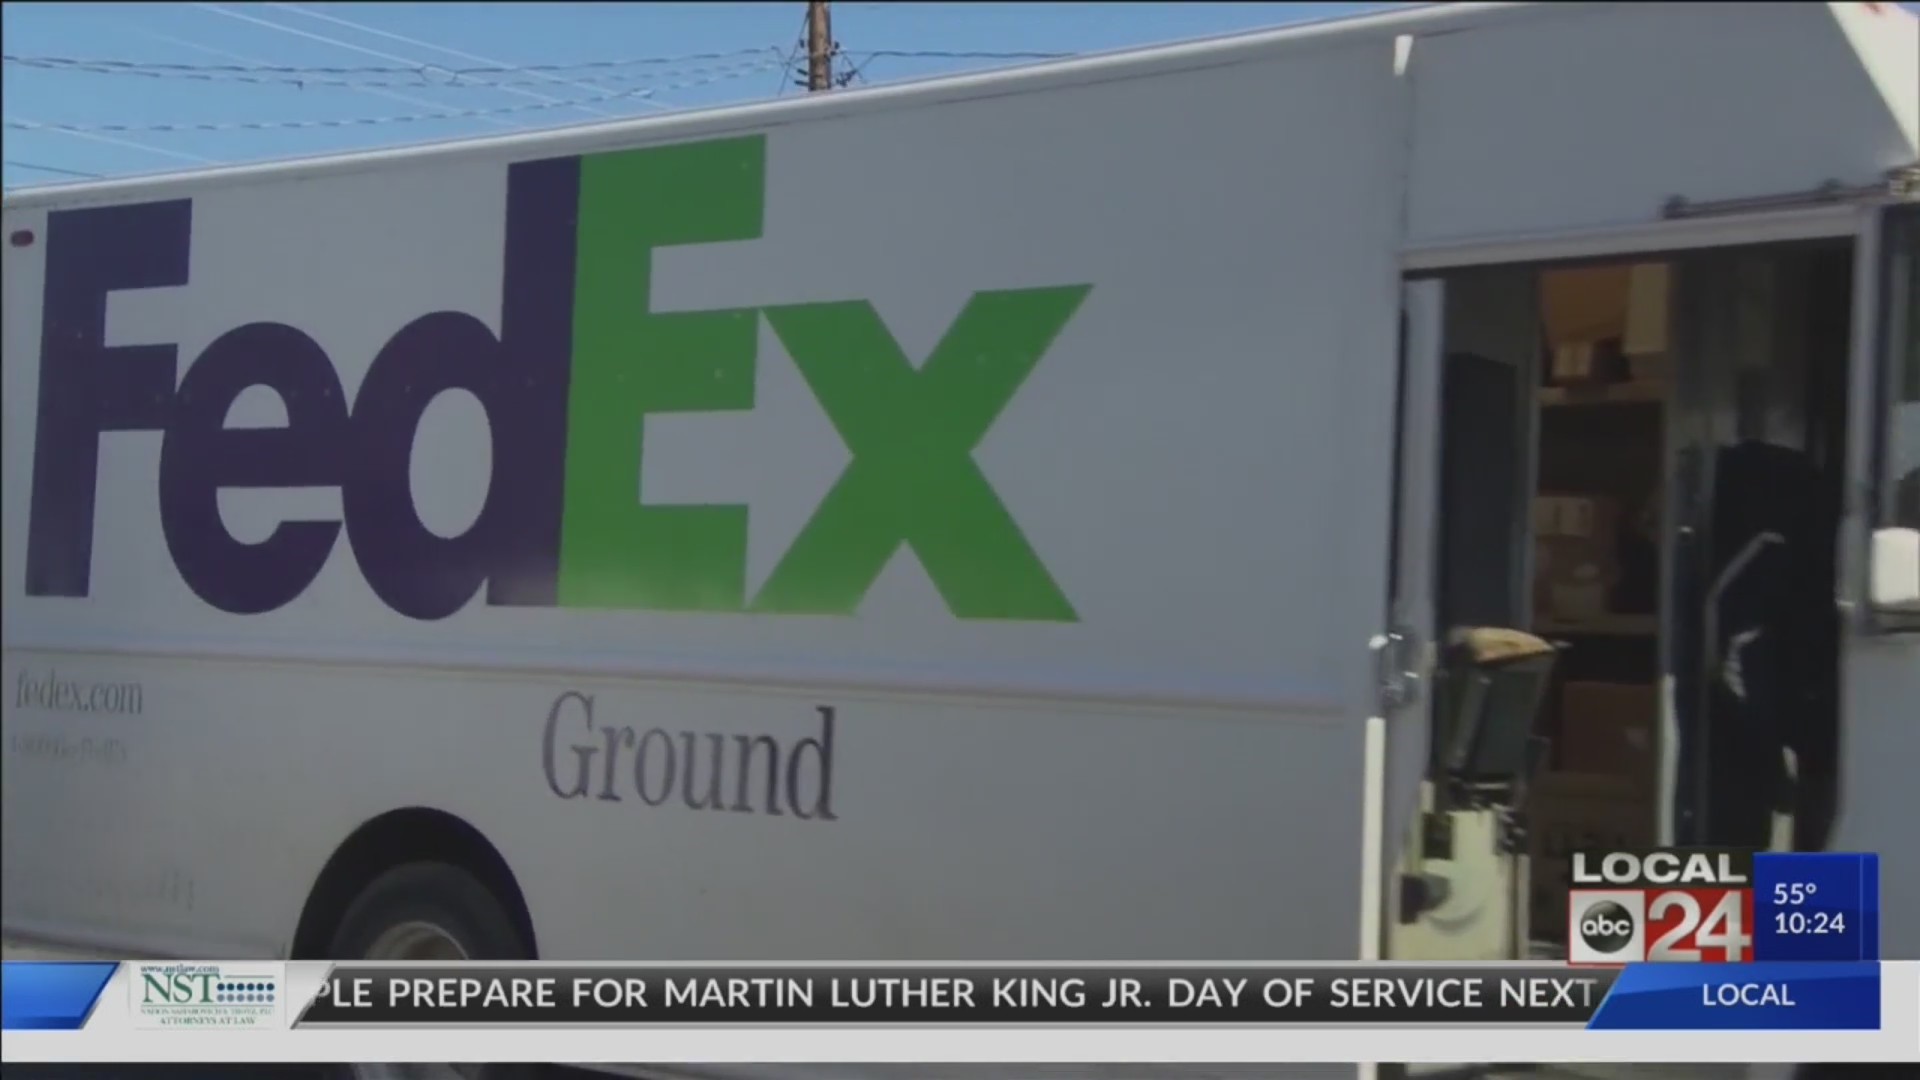 Delivery drama: the on again, off again, on again business relationship between FedEx and Amazon